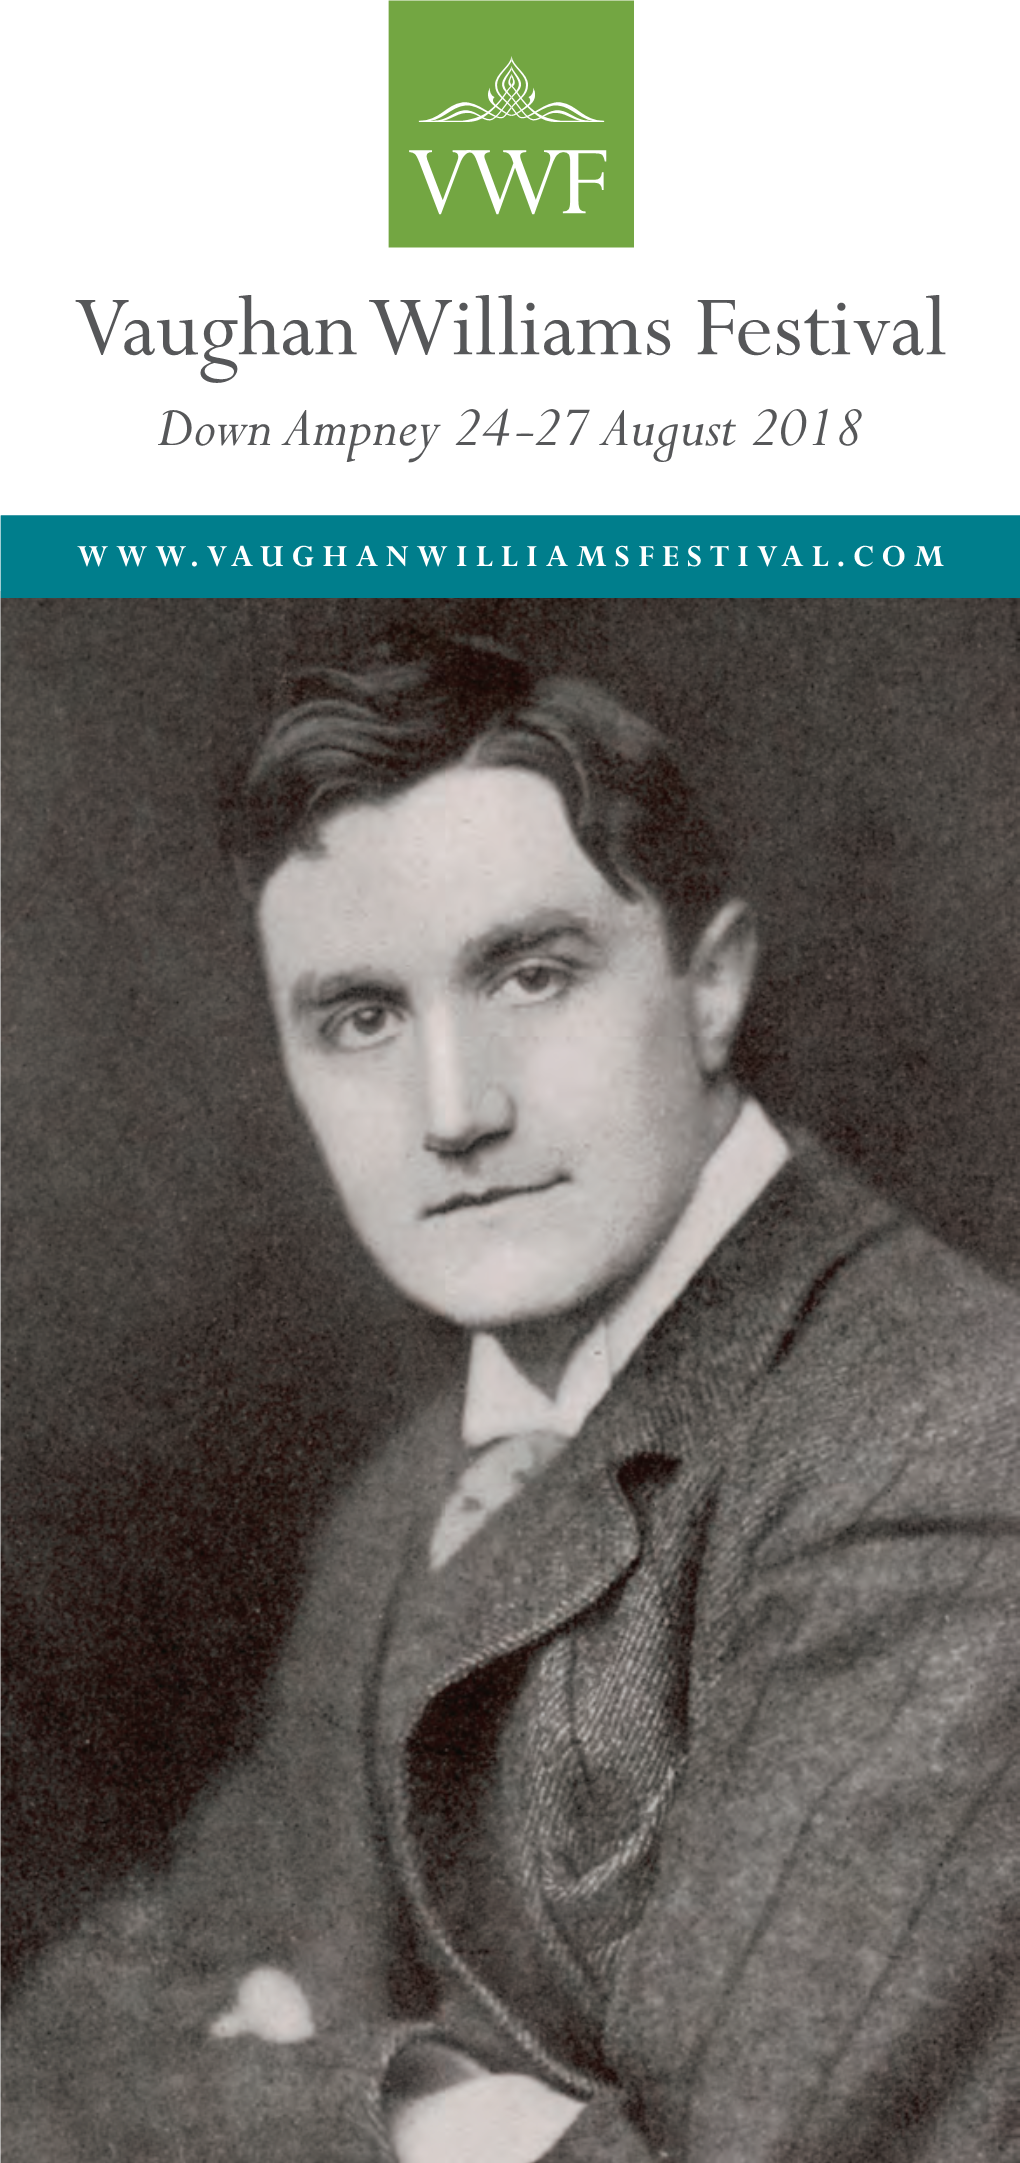 Vaughan Williams Festival Presents a Series of Ten Concerts, Lectures and Events Over the Course of the August Bank Holiday Weekend, 24–27 Inclusive